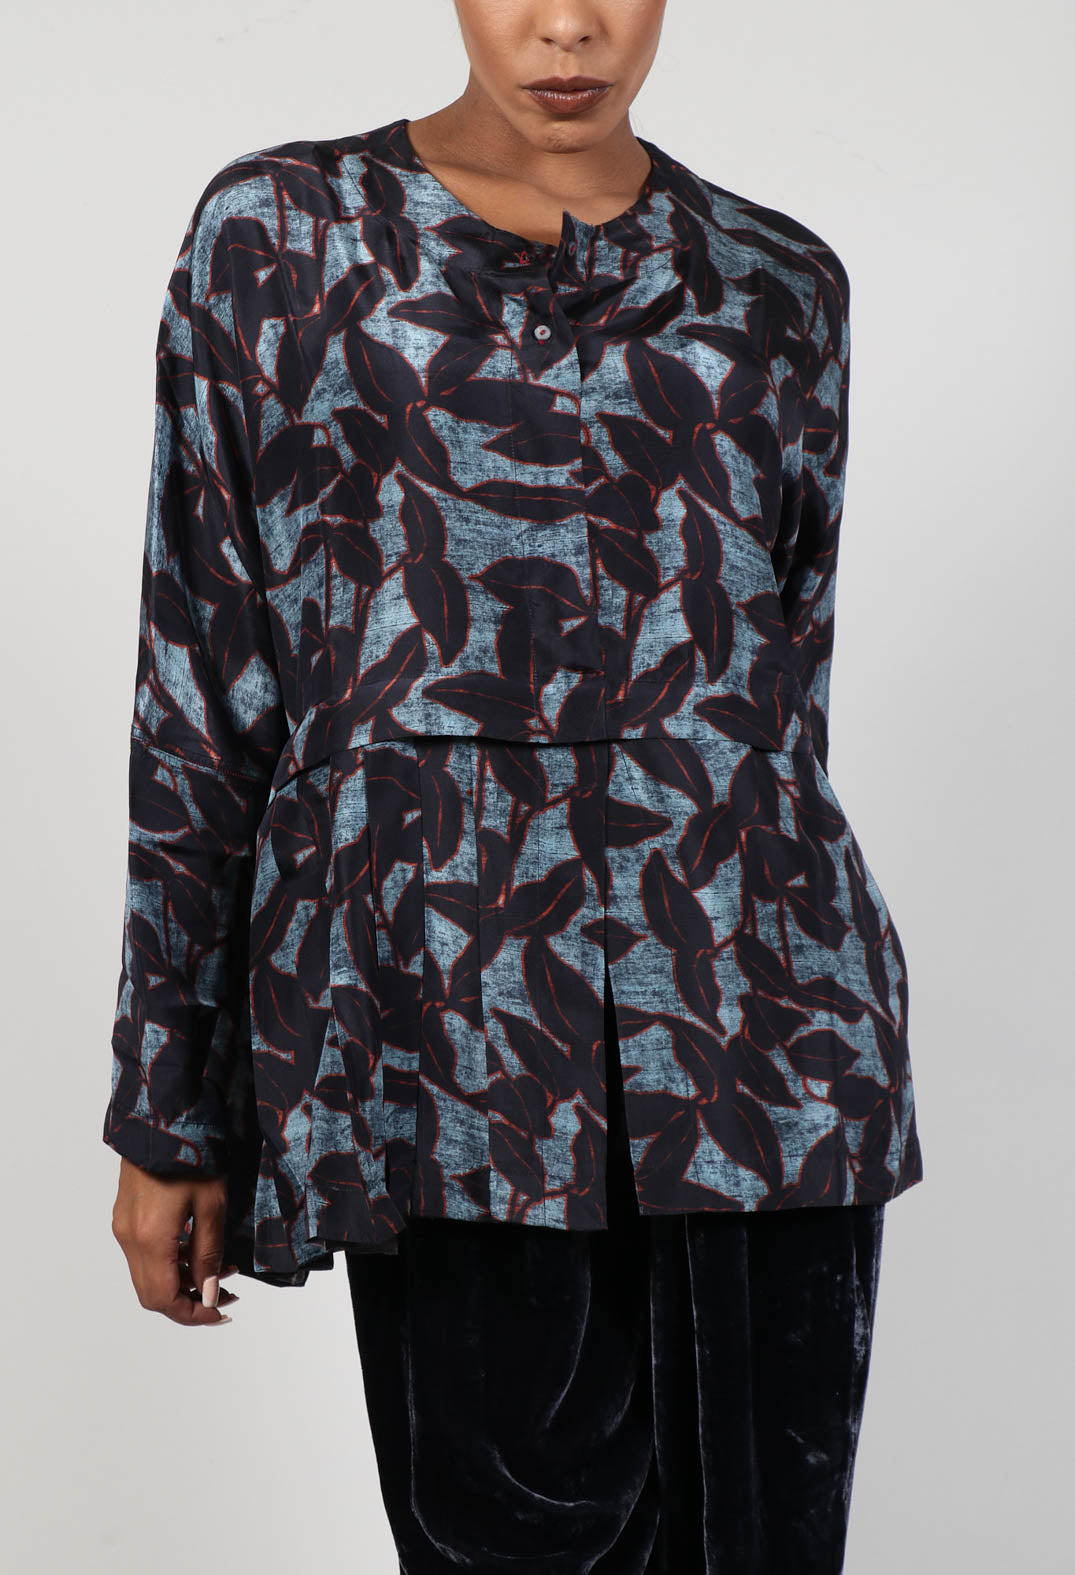 Shirt Isabella Banyan Leaves in Charcoal and Cloud Blue